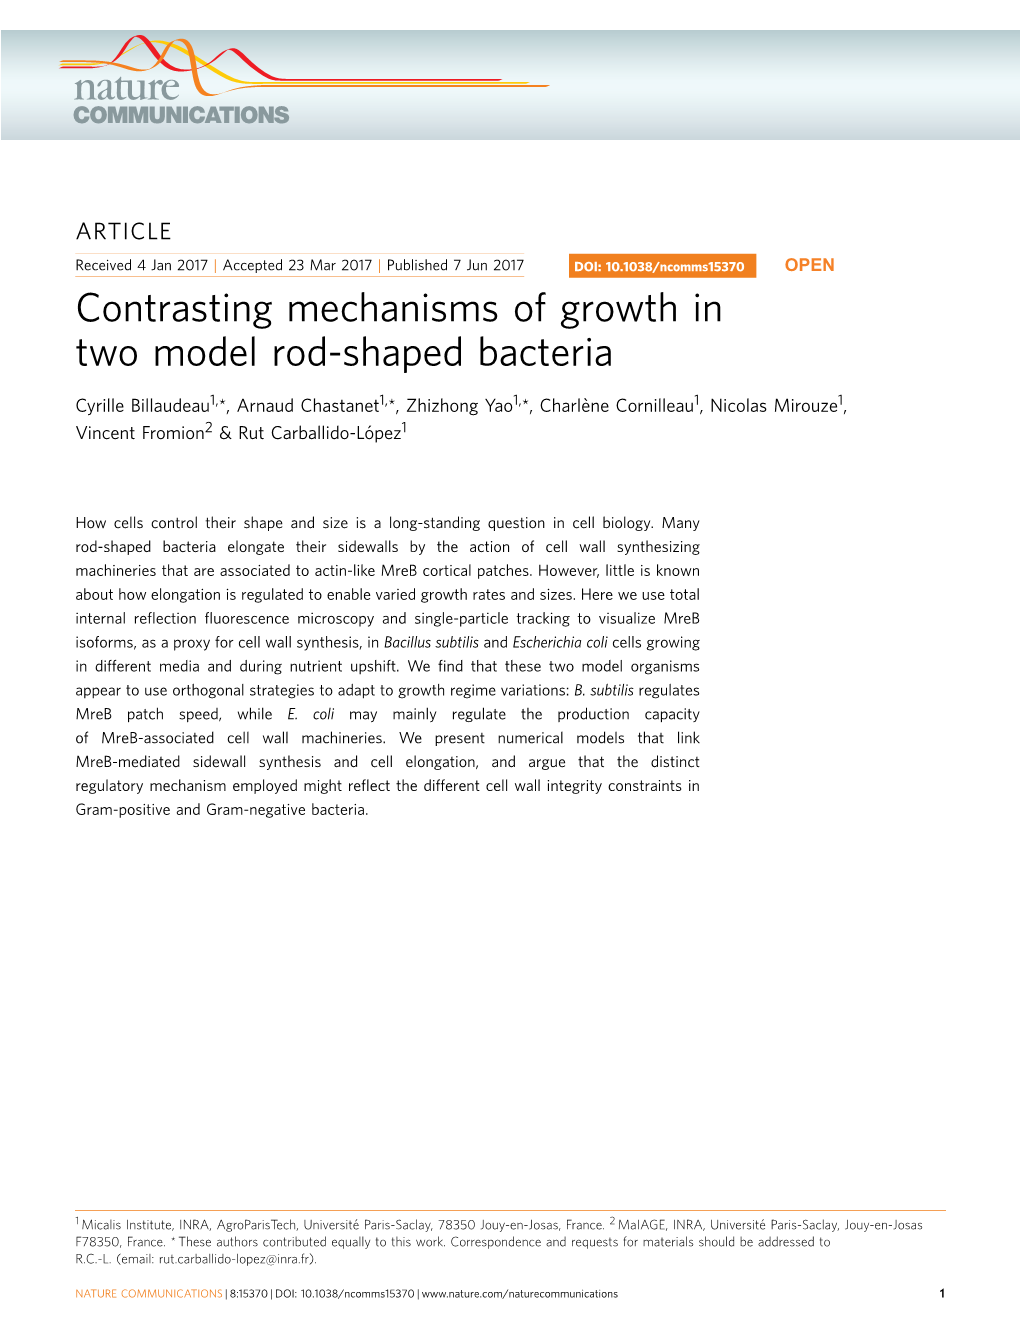 Contrasting Mechanisms of Growth in Two Model Rod-Shaped Bacteria